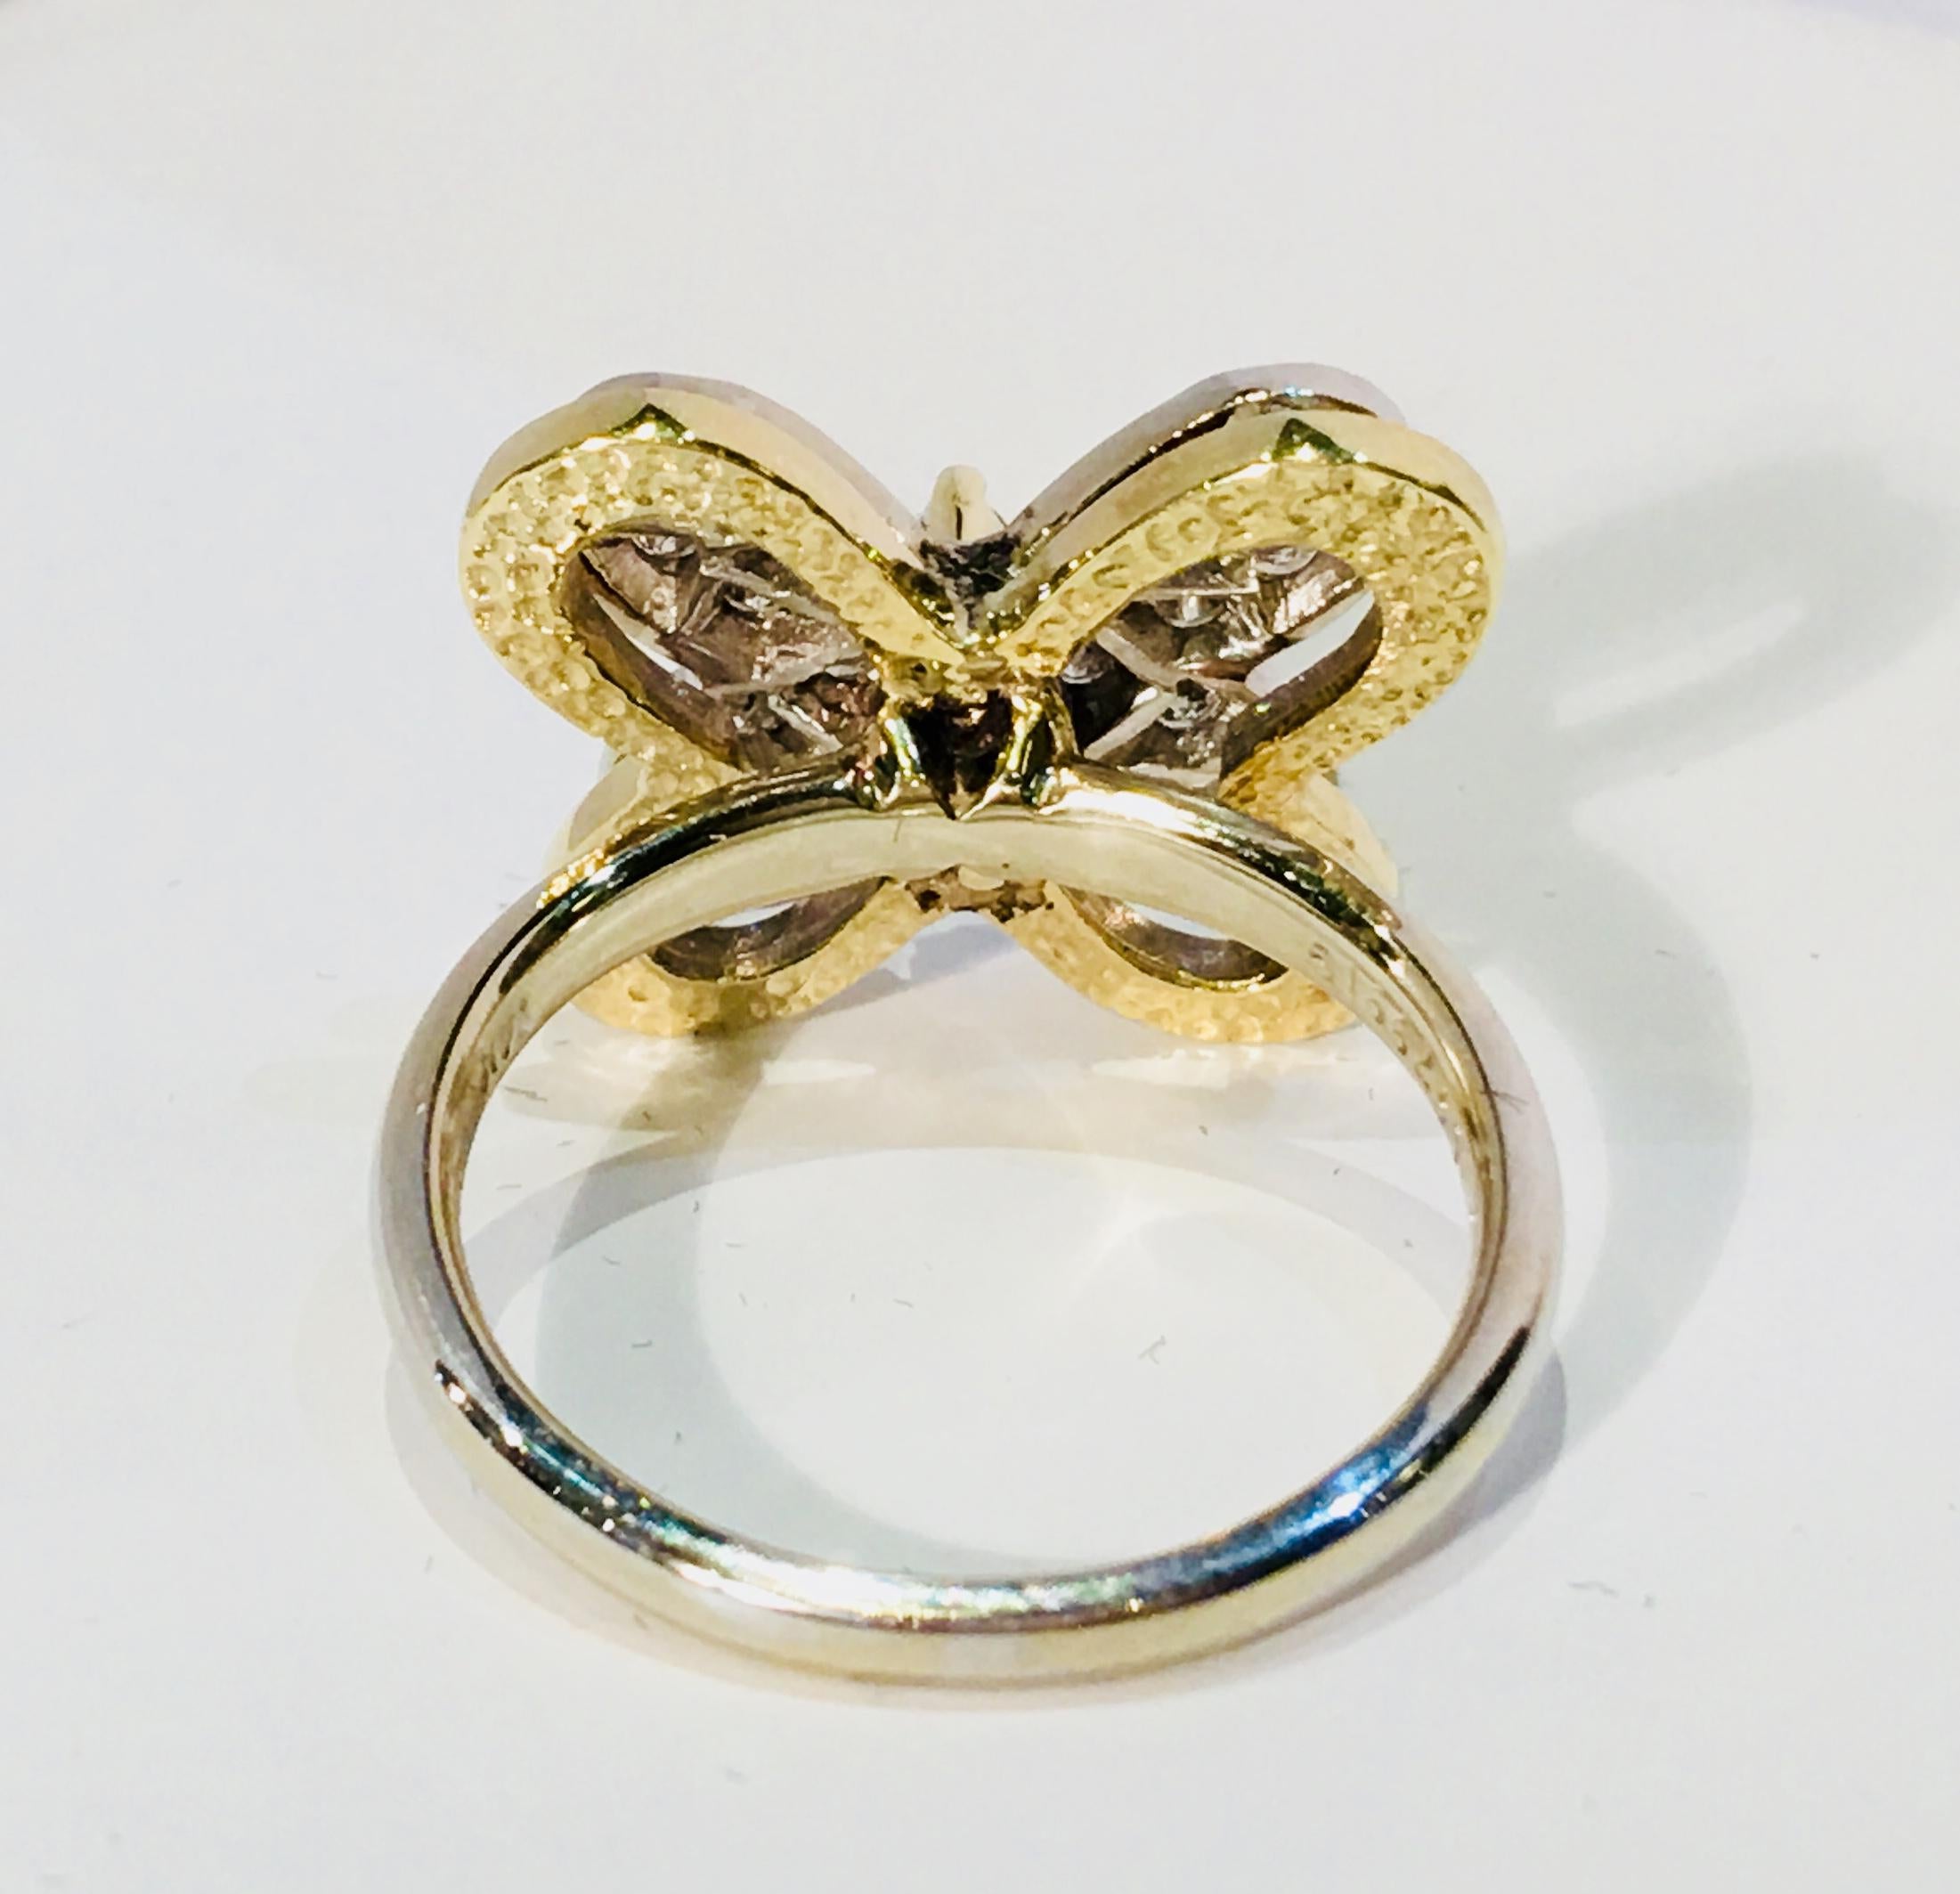 3 Dimensional 2 Tone 14k Gold Butterfly Ring 1.04 Carats Diamonds and Emerald  2